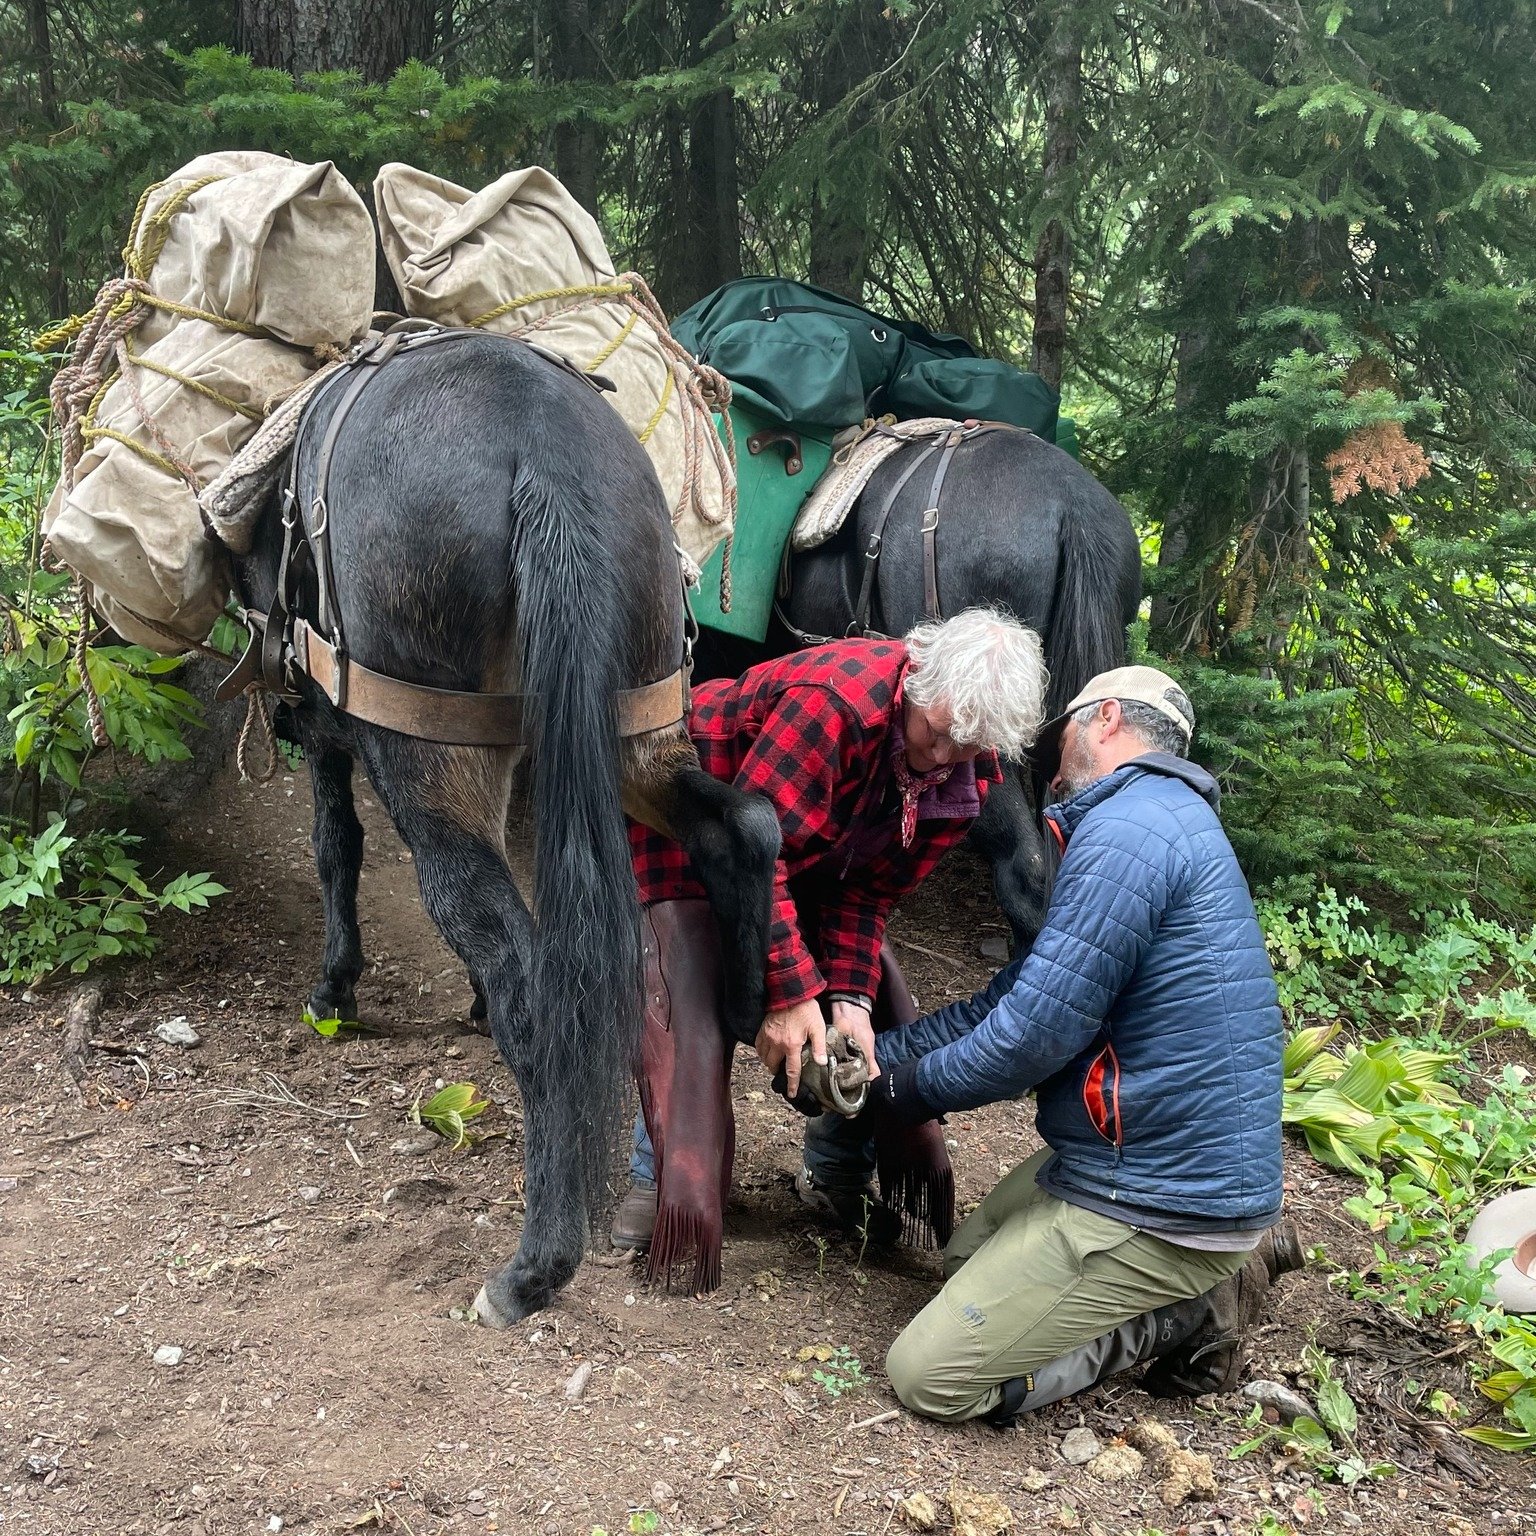 We're excited to announce another new clinic this year: a Backcountry Hoof Care Clinic! If you travel with stock in the backcountry, this clinic will give you the basics on how to deal with hoof care emergencies on the trail.

This clinic is led by B